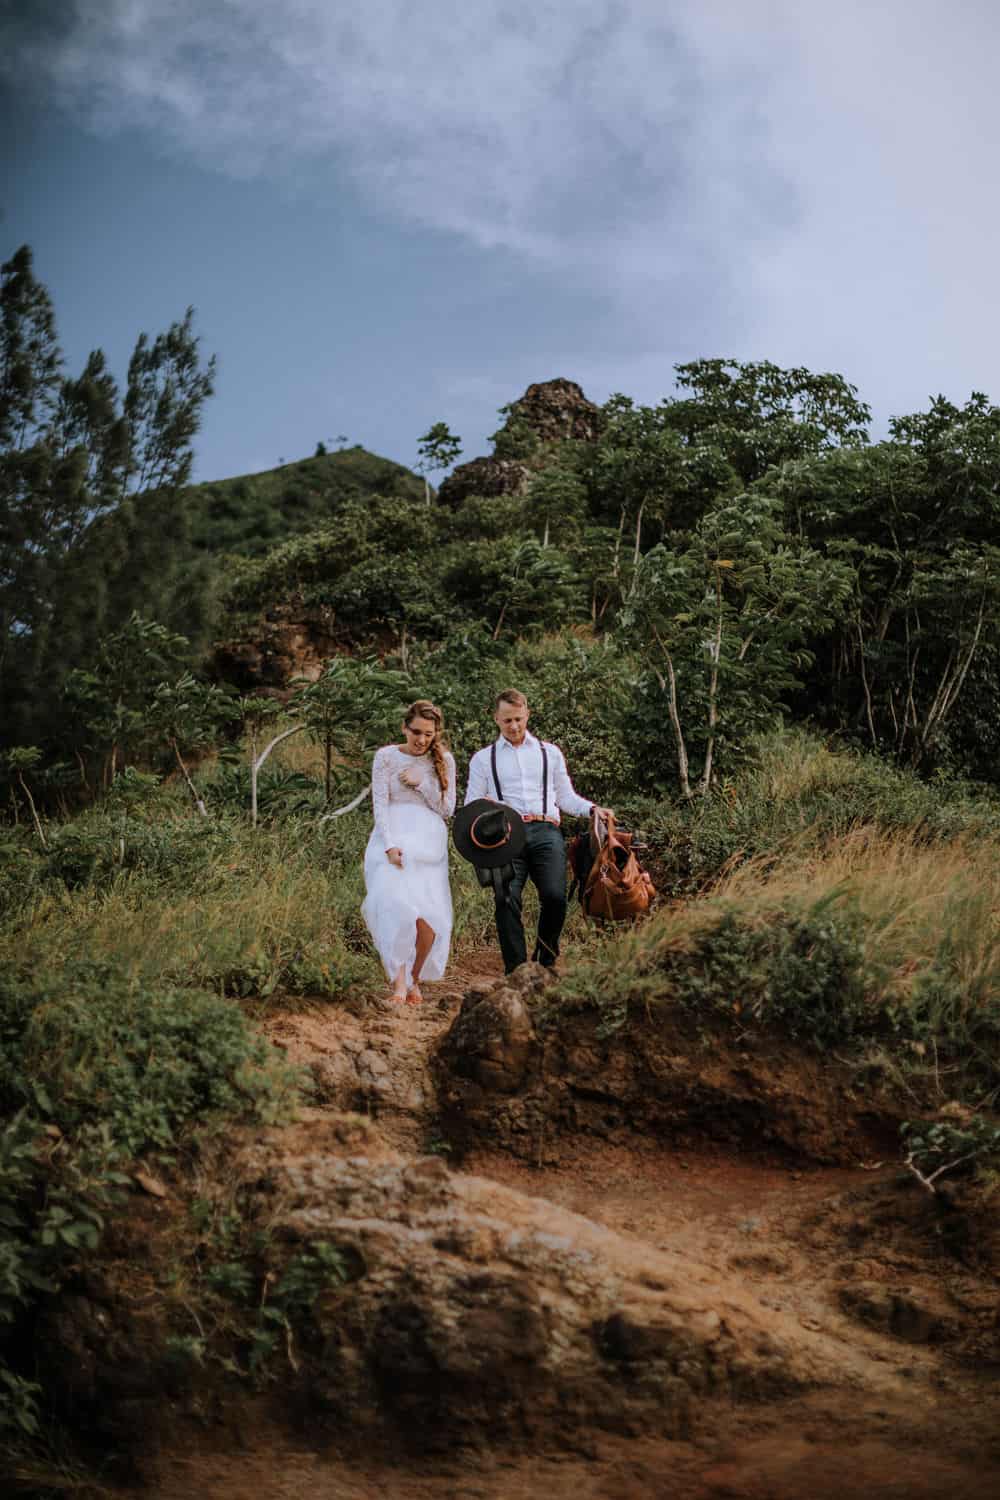 DESTINATION WEDDING PHOTOGRAPHER BASED OUT OF OAHU HAWAII READY TO TRAVEL